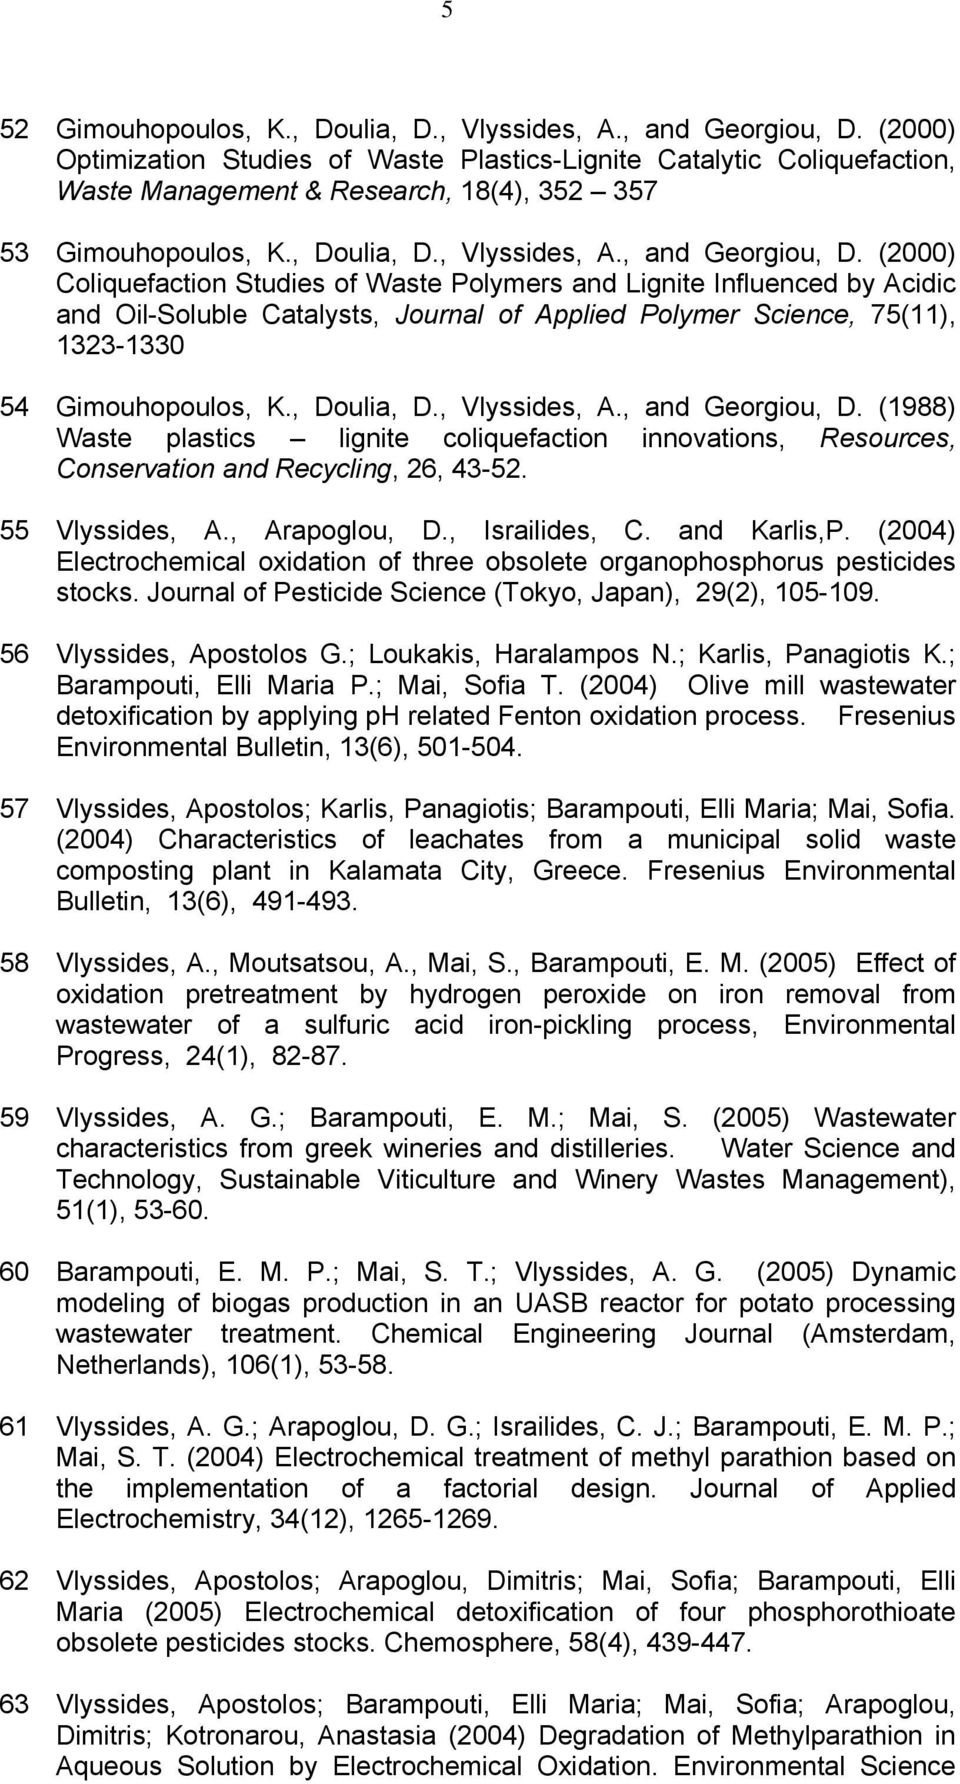 (2000) Coliquefaction Studies of Waste Polymers and Lignite Influenced by Acidic and Oil-Soluble Catalysts, Journal of Applied Polymer Science, 75(11), 1323-1330 54 Gimouhopoulos, K., Doulia, D.